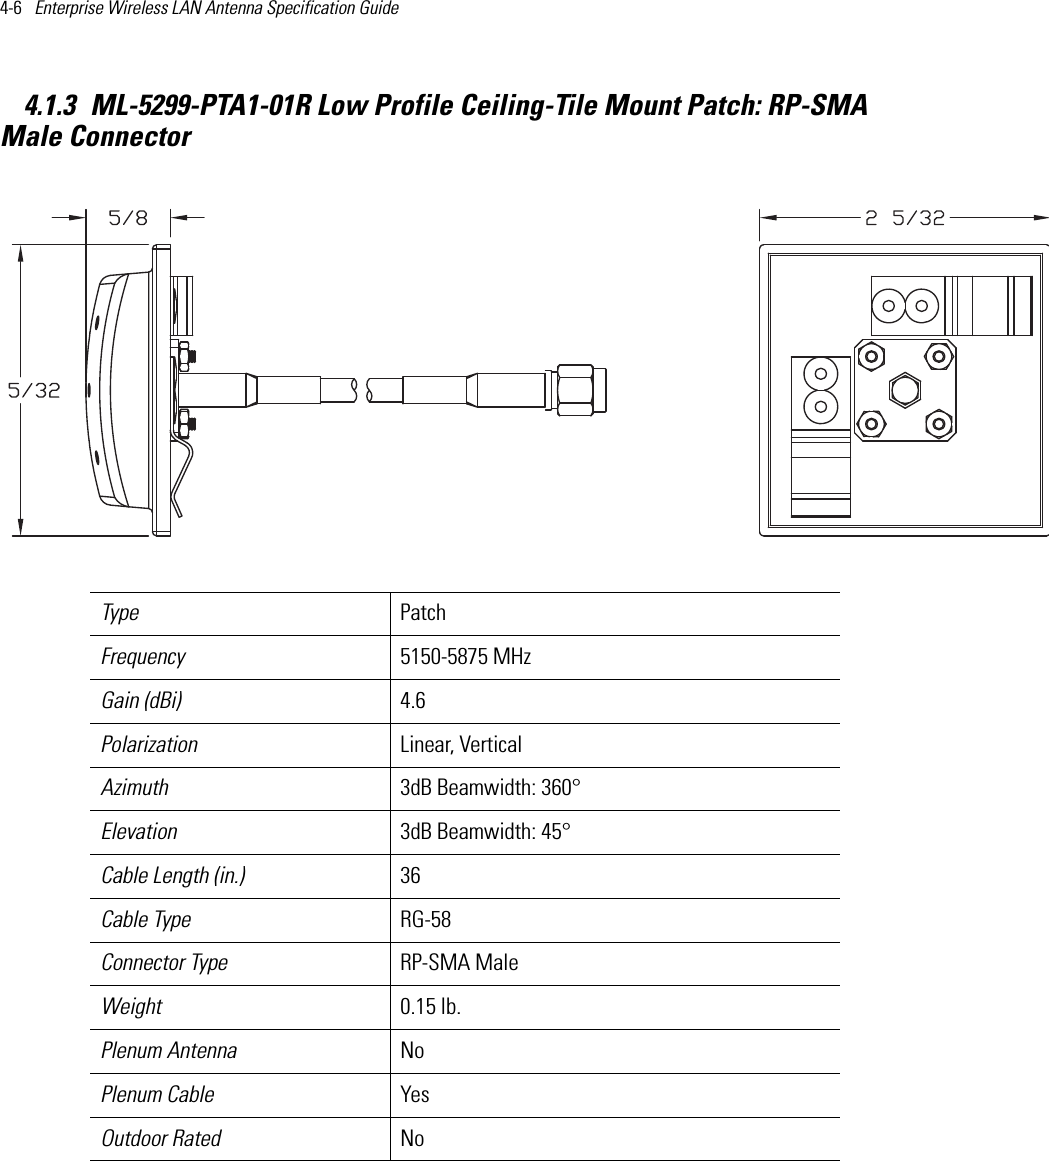 4-6   Enterprise Wireless LAN Antenna Specification Guide 4.1.3 ML-5299-PTA1-01R Low Profile Ceiling-Tile Mount Patch: RP-SMA Male Connector  Type PatchFrequency 5150-5875 MHzGain (dBi) 4.6Polarization Linear, VerticalAzimuth 3dB Beamwidth: 360°Elevation 3dB Beamwidth: 45°Cable Length (in.) 36Cable Type RG-58Connector Type RP-SMA MaleWeight 0.15 lb.Plenum Antenna NoPlenum Cable YesOutdoor Rated No